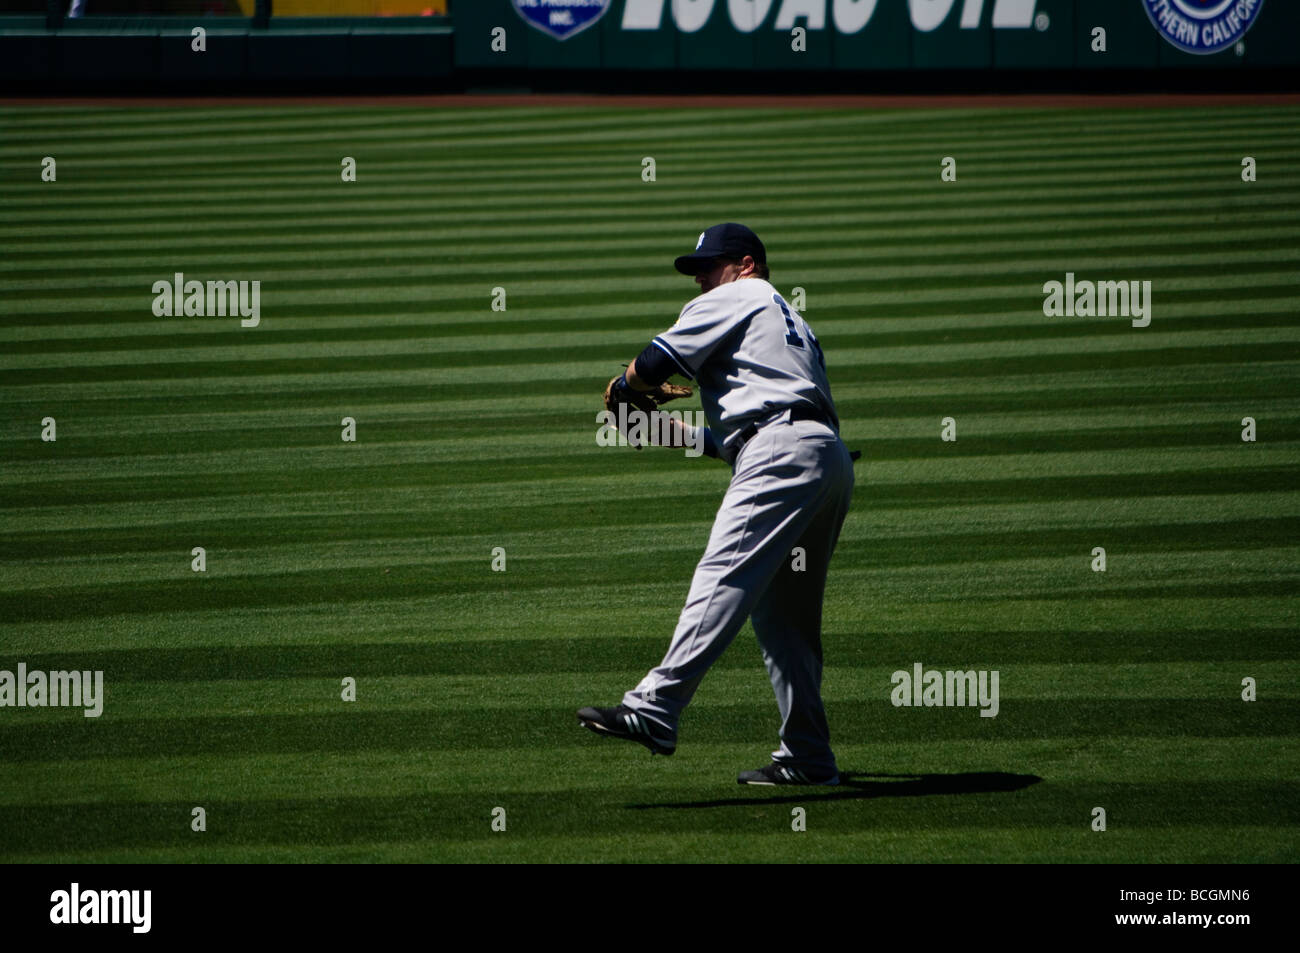 Erik Hinske warms up in right field in between innings at an Angels/Yankees game. Stock Photo